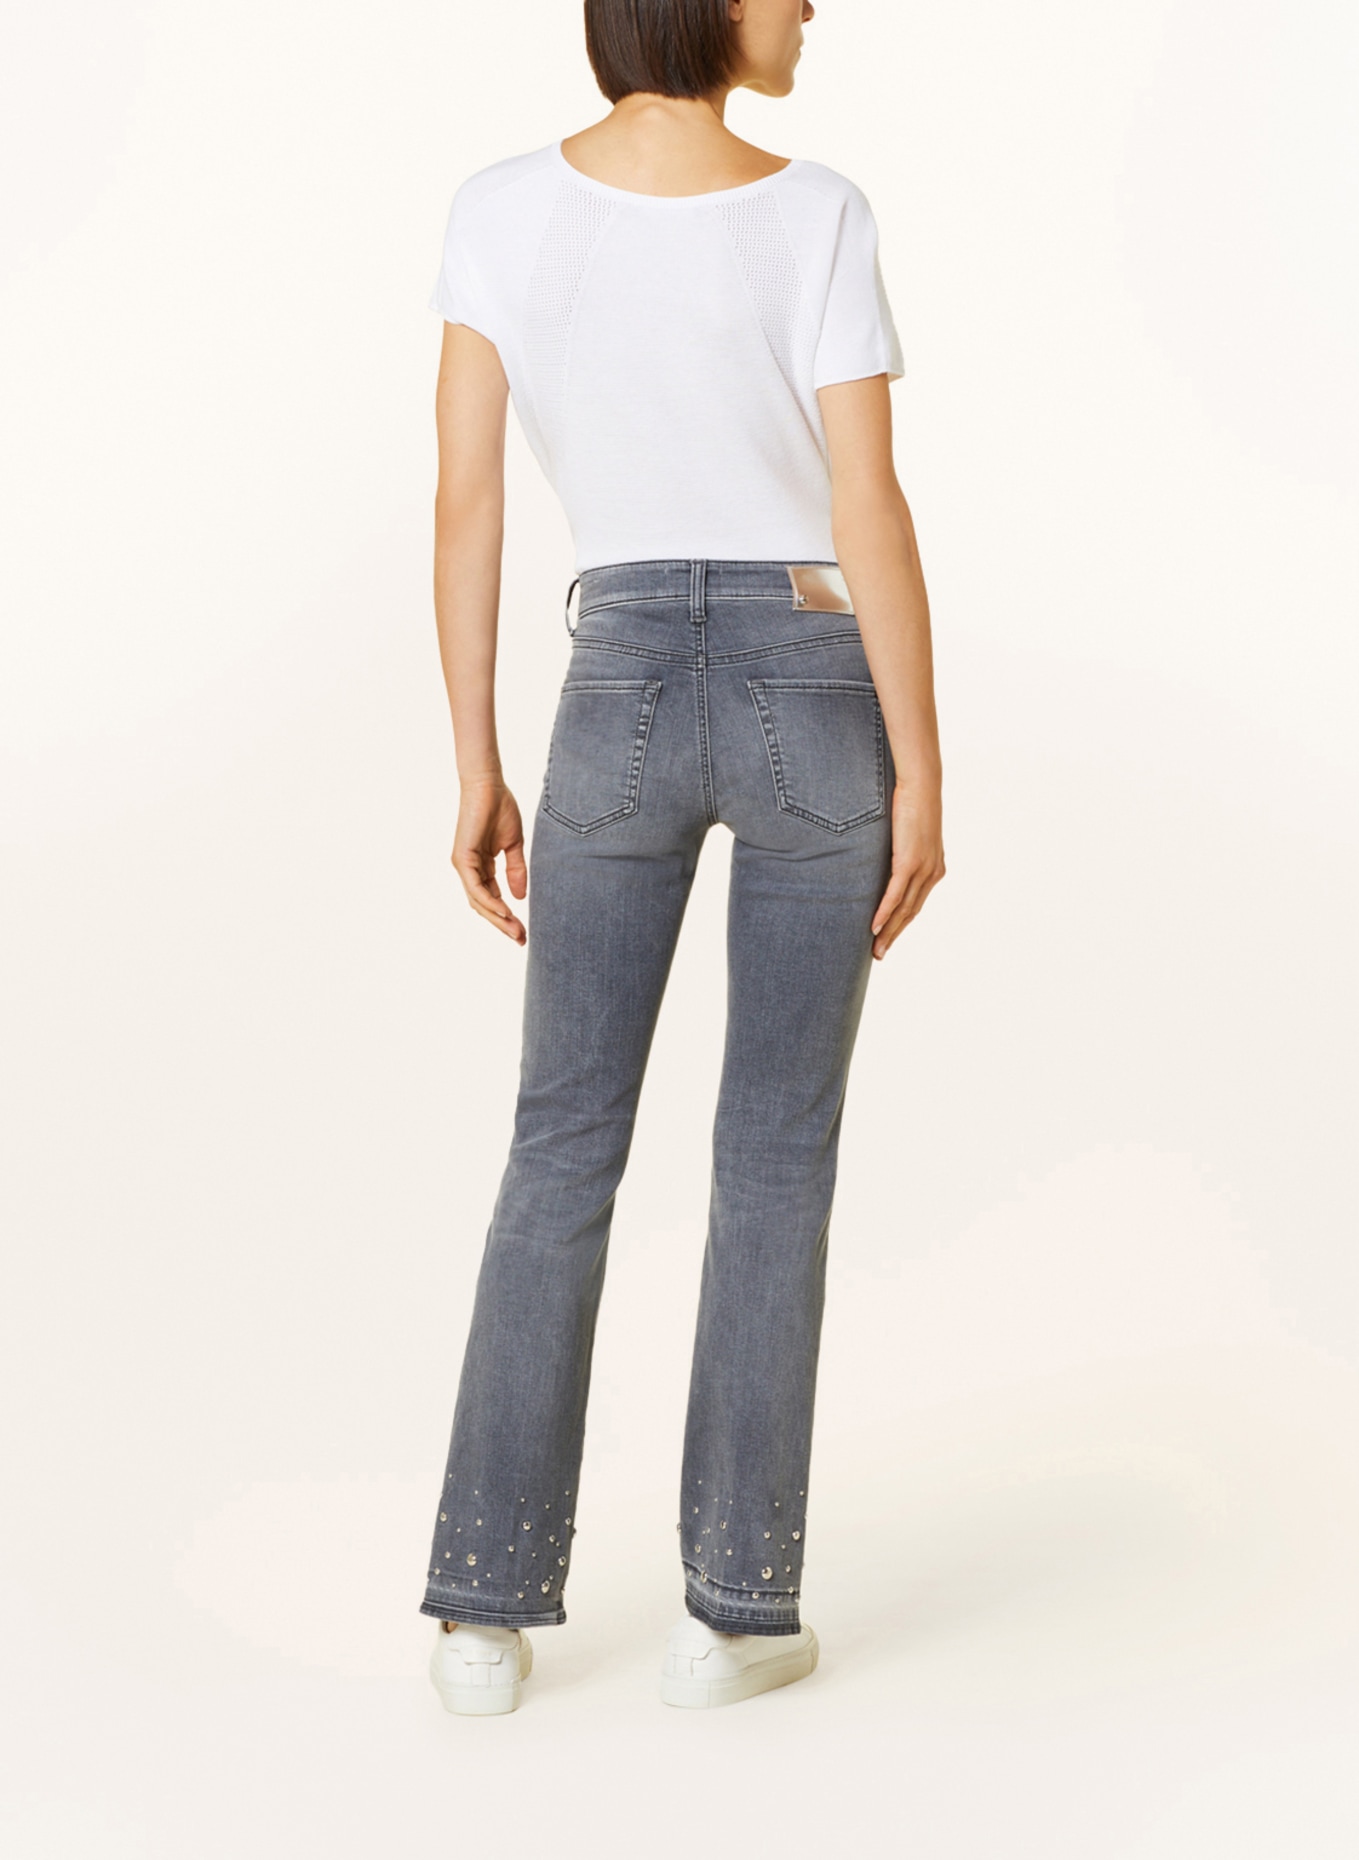 CAMBIO Flared jeans PARIS with rivets, Color: 5241 feminin contrast used ope (Image 3)